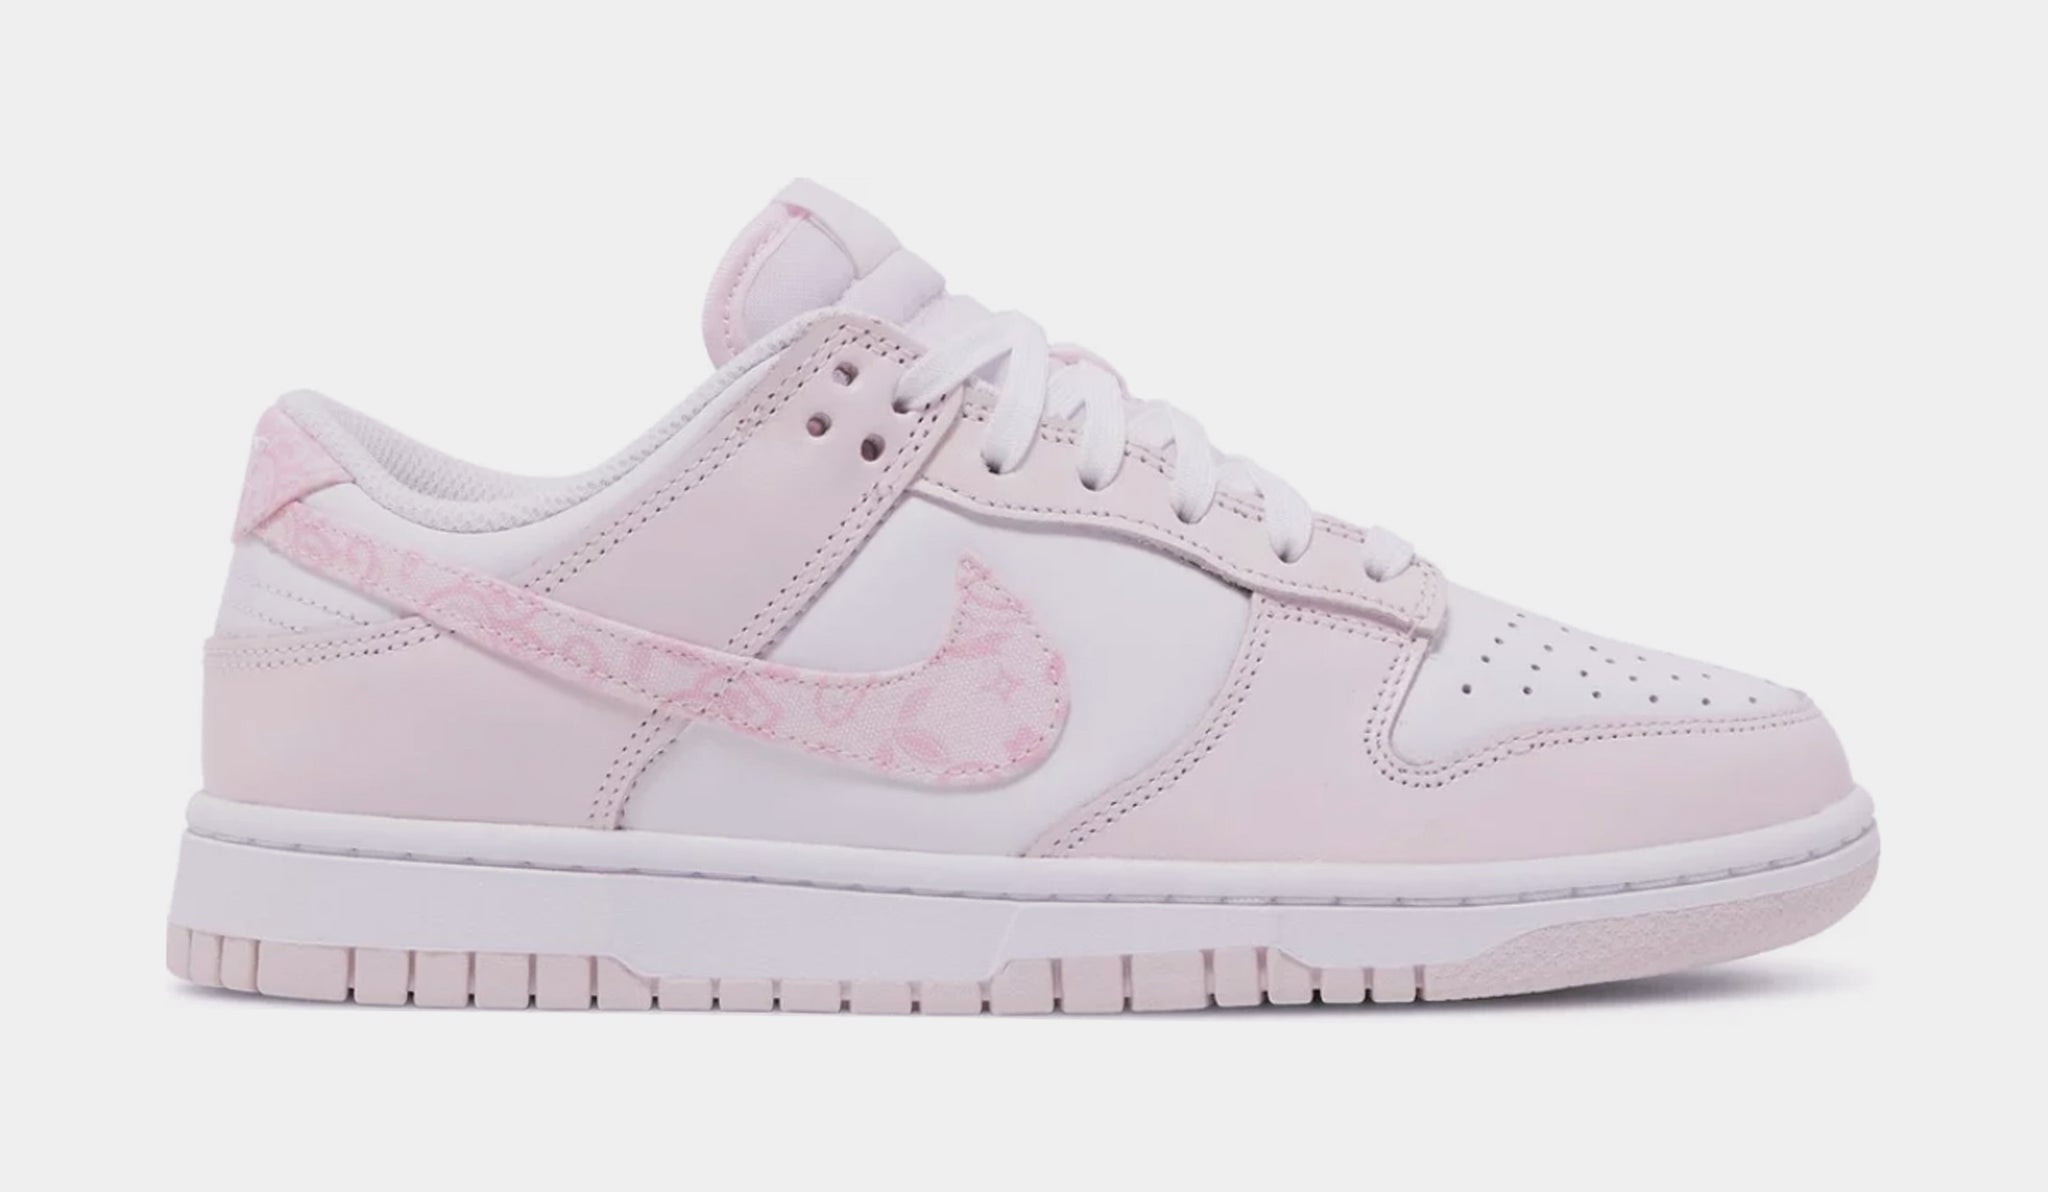 Nike Dunk Low Pink Paisley Womens Lifestyle Shoes Pink Limit One